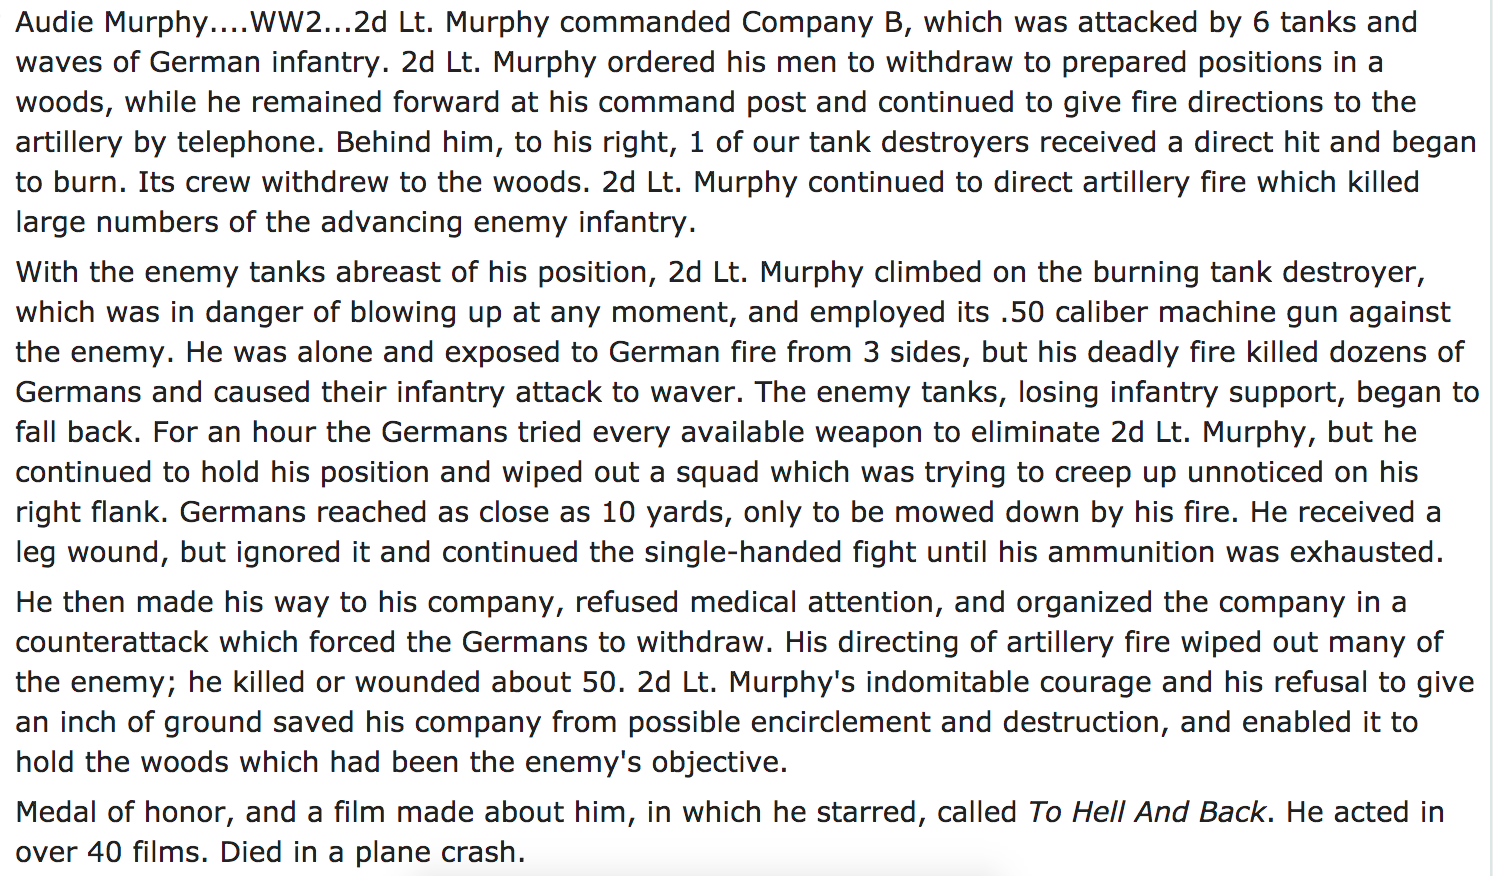 ask reddit - Murphy commanded Company B, which was attacked by 6 tanks and waves of German infantry. 2d Lt. Murphy ordered his men to withdraw to prepared positions in a woods, while he remained forward at his command post and